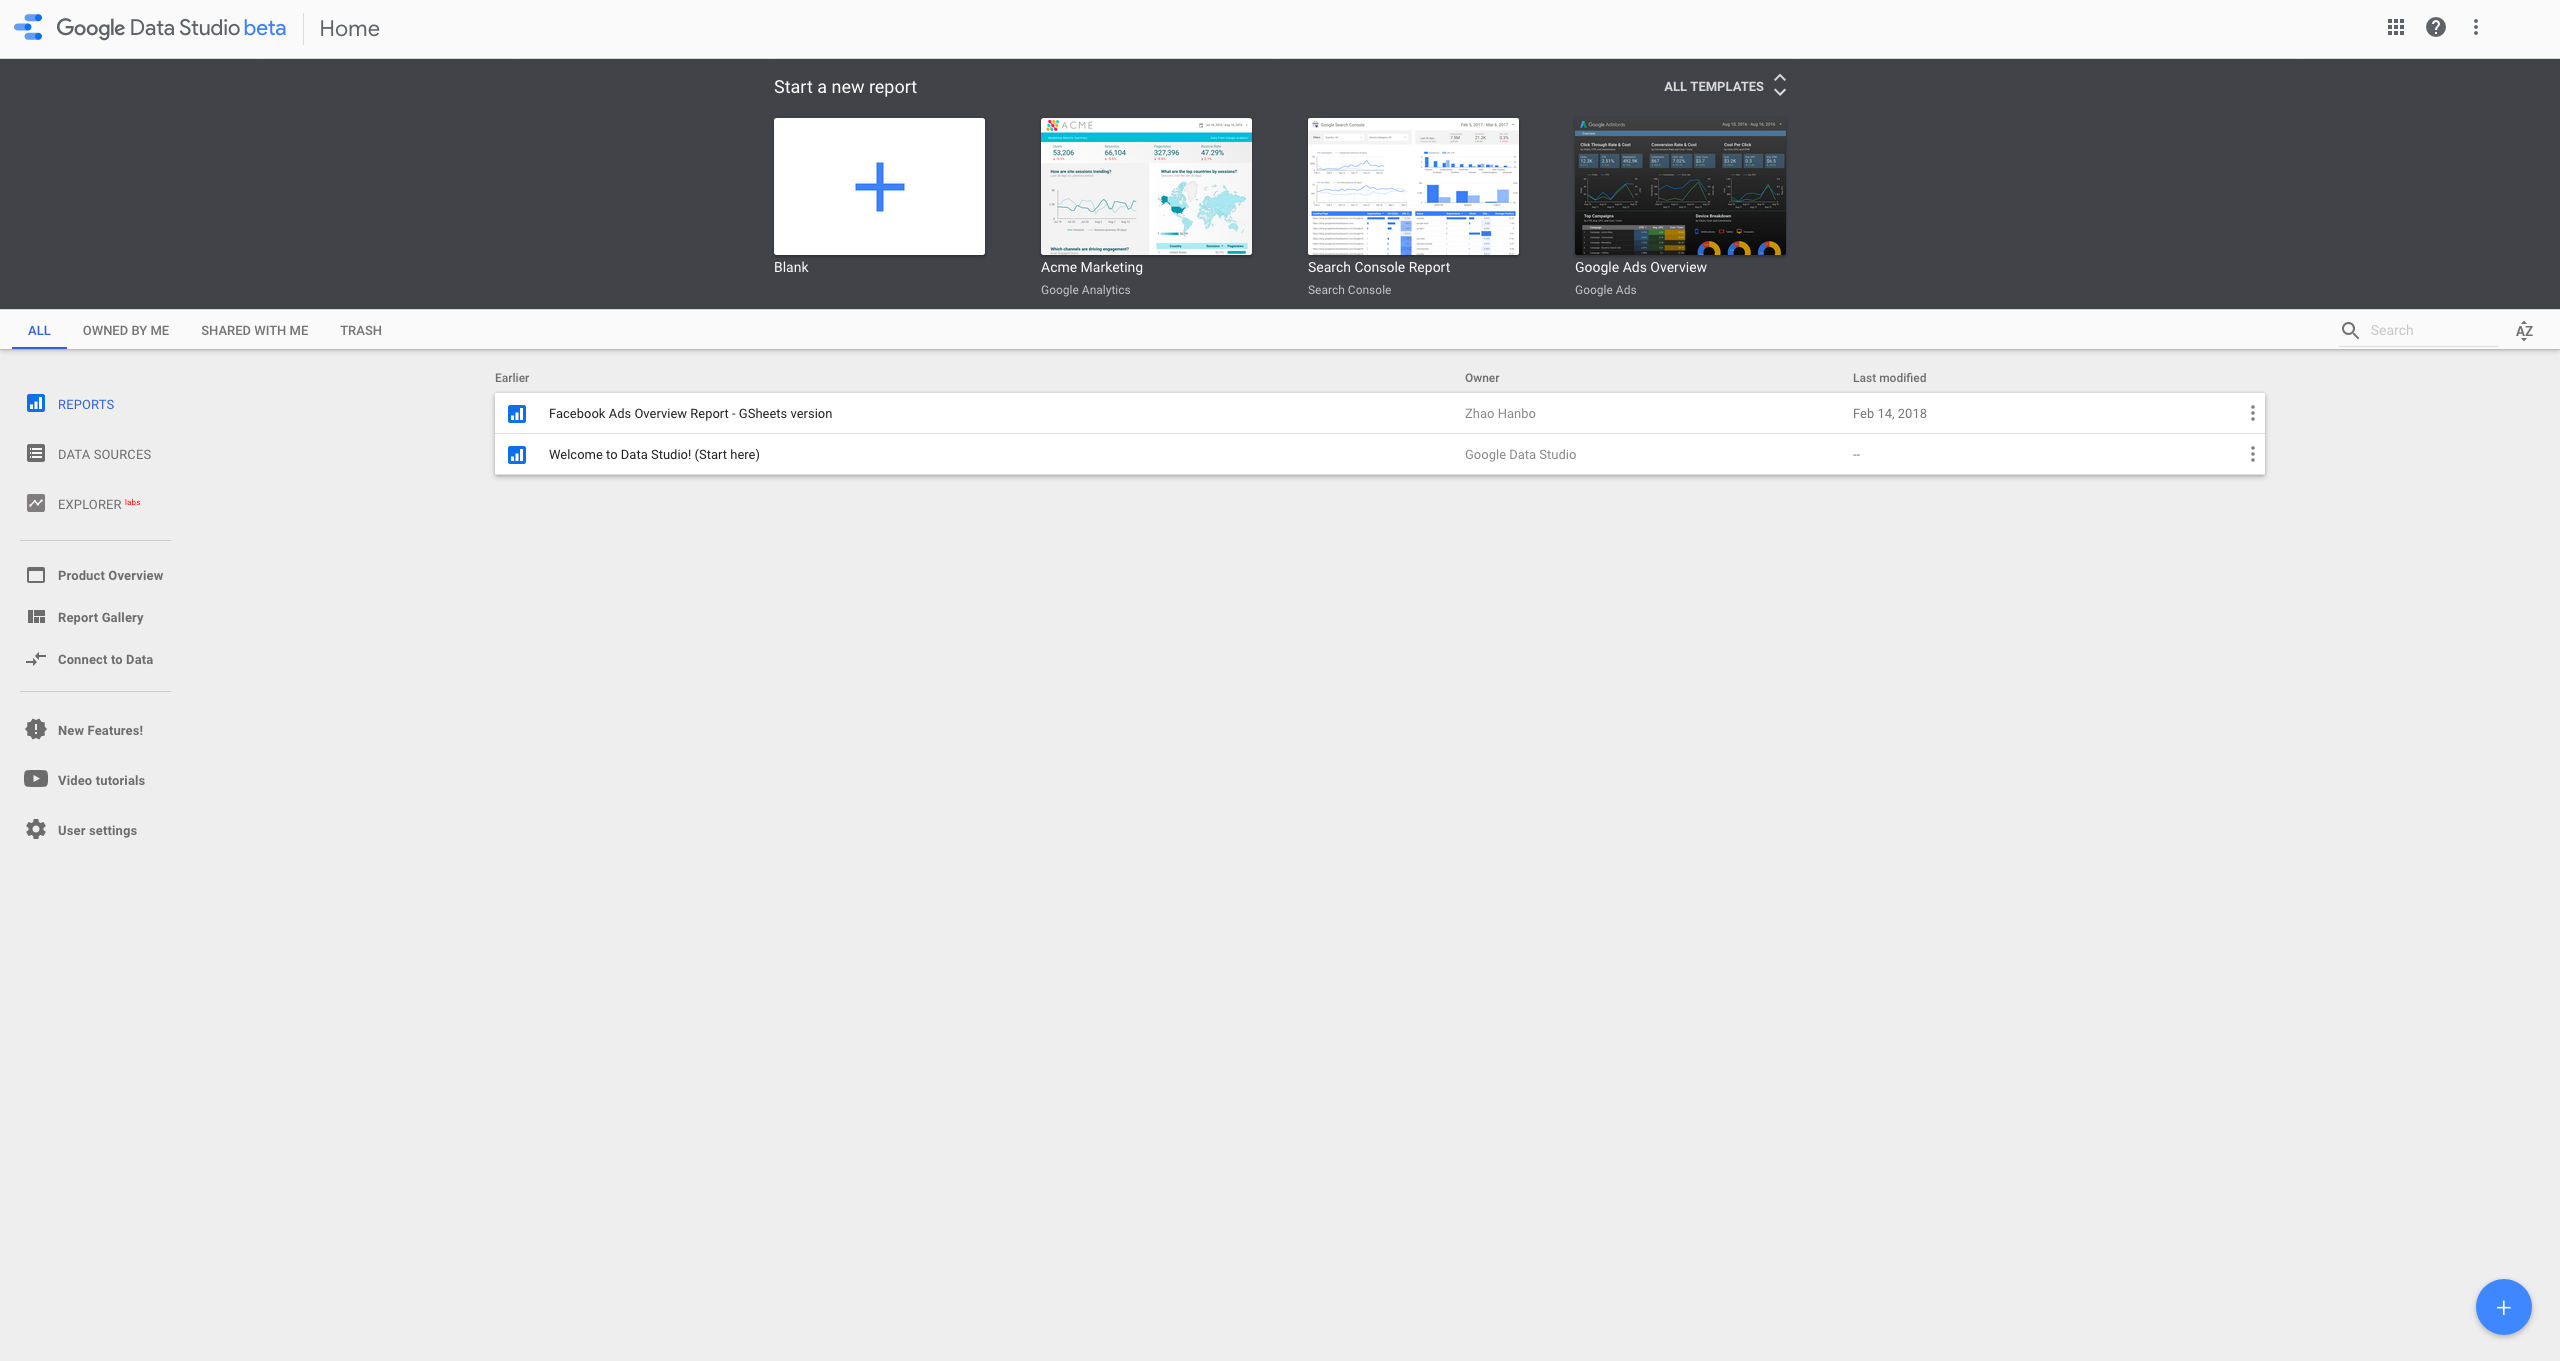 Google Data Studio Software - The main Google Data Studio home screen showing available templates and new blank report button, plus a chronological quick launch list of previous reports or data sources